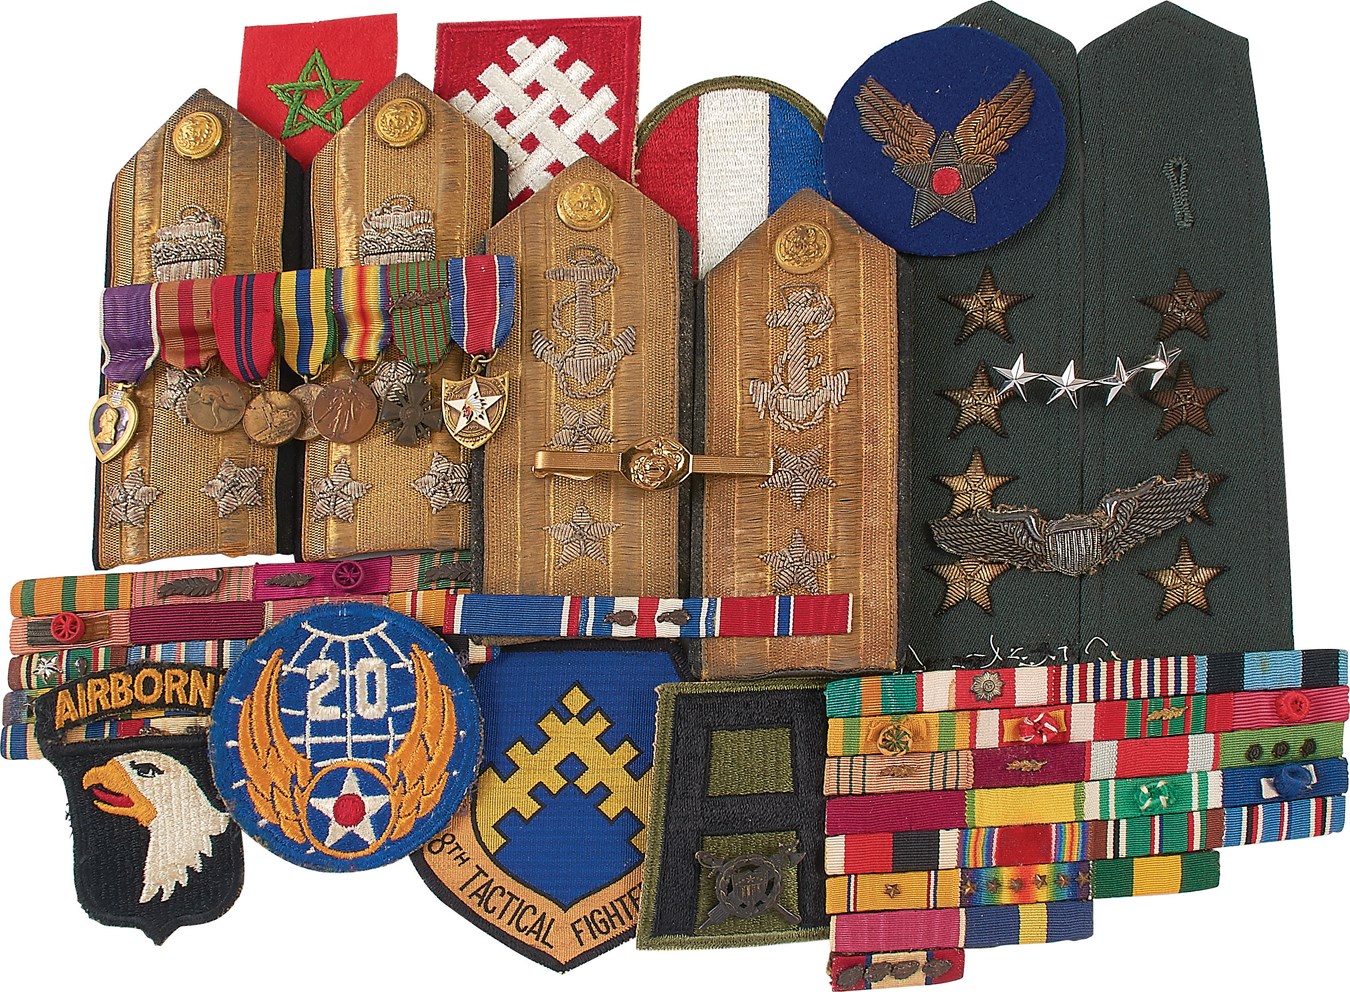 Jim Schendel Autograph Collection - Military Generals & Admirals Personally Gifted Mementos Collection with Uniform Patches (100+)